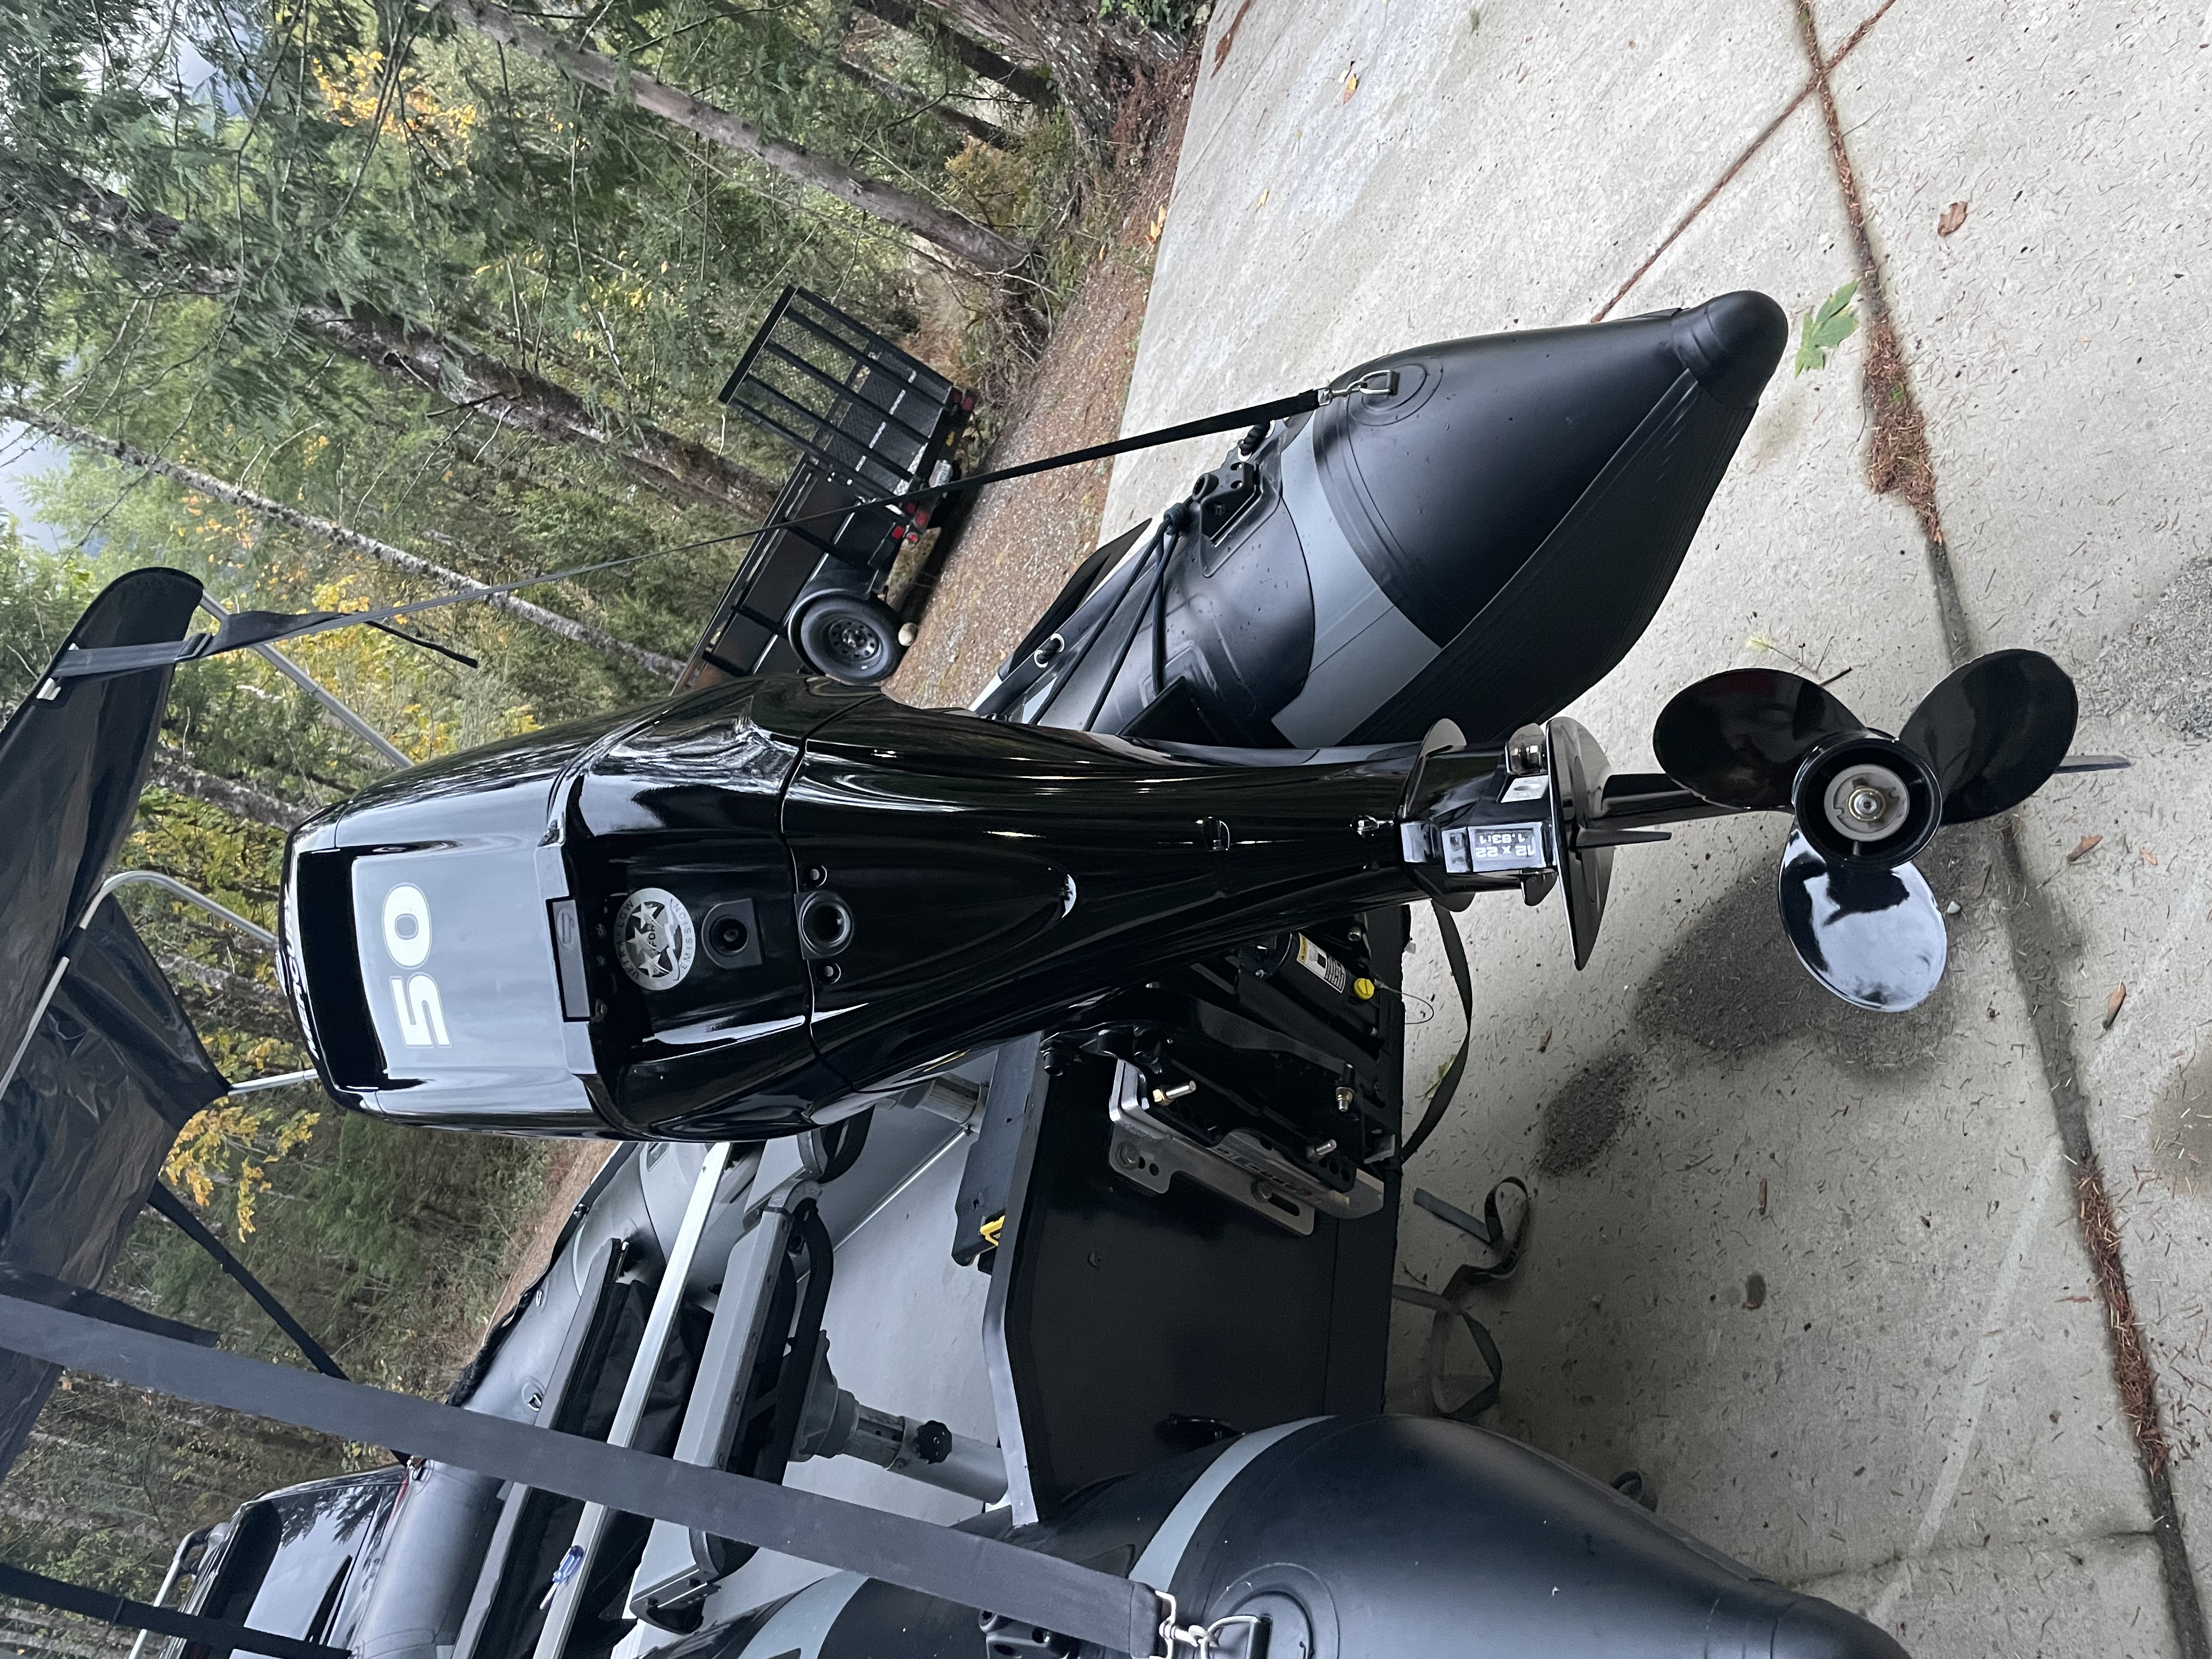 2019 Stryker Pro 500 Inflatable for sale in Snoqualmie, WA - image 4 